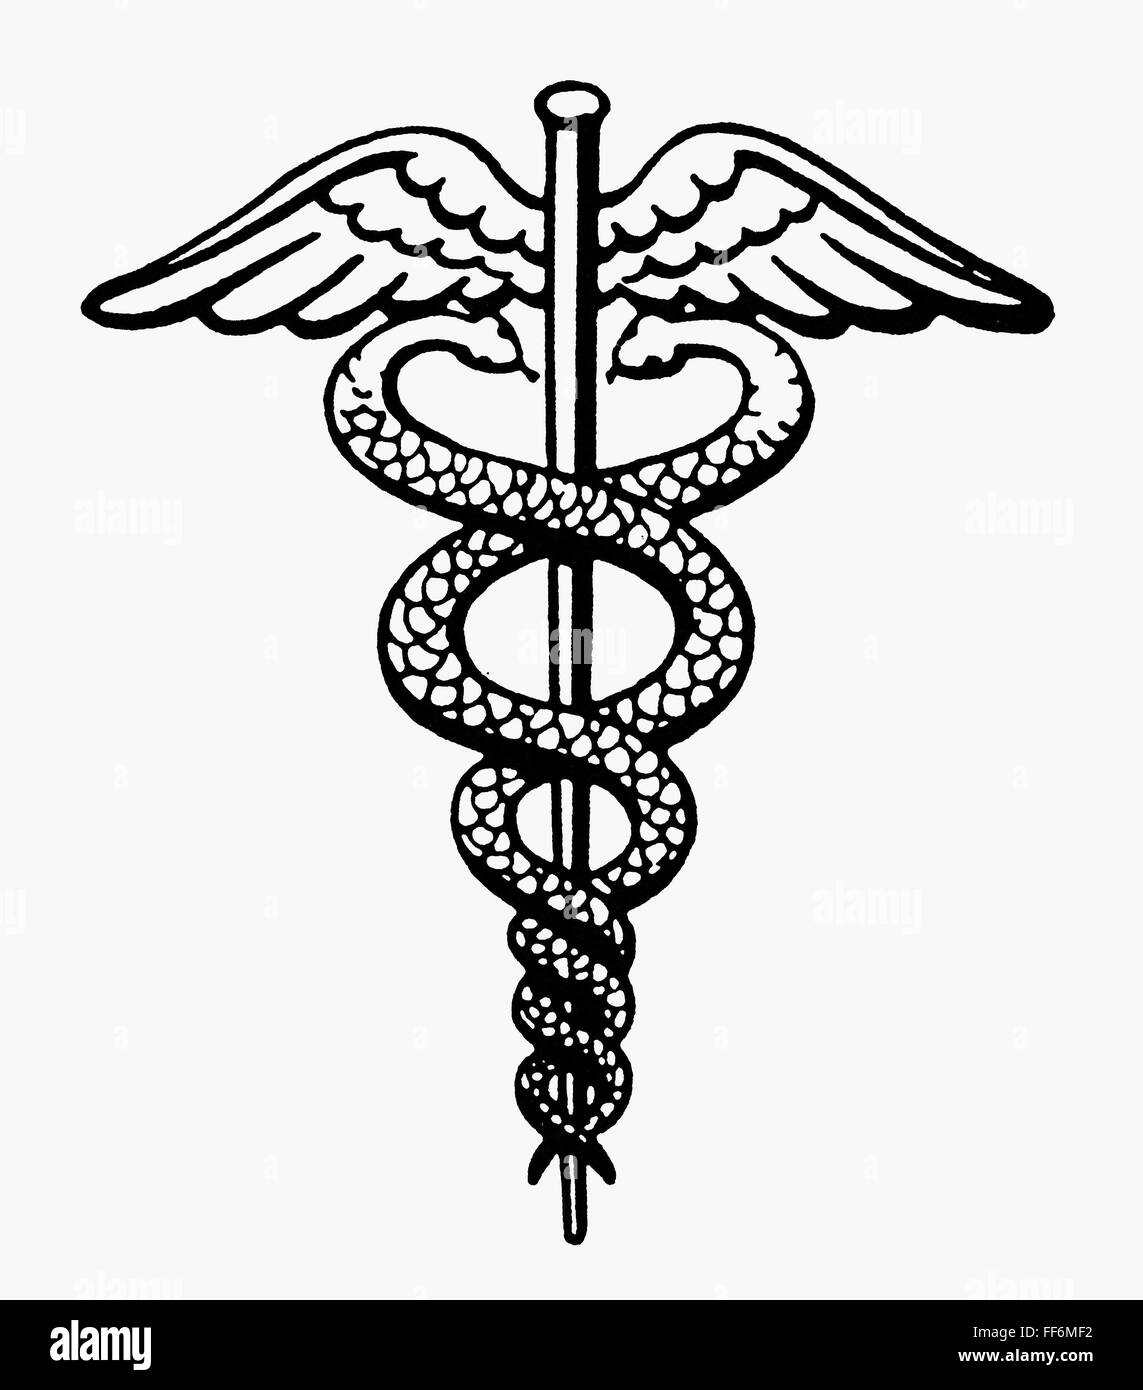 THE CADUCEUS. /nAn insignia modeled on Hermes' staff and used as the symbol of the medical profession. Stock Photo